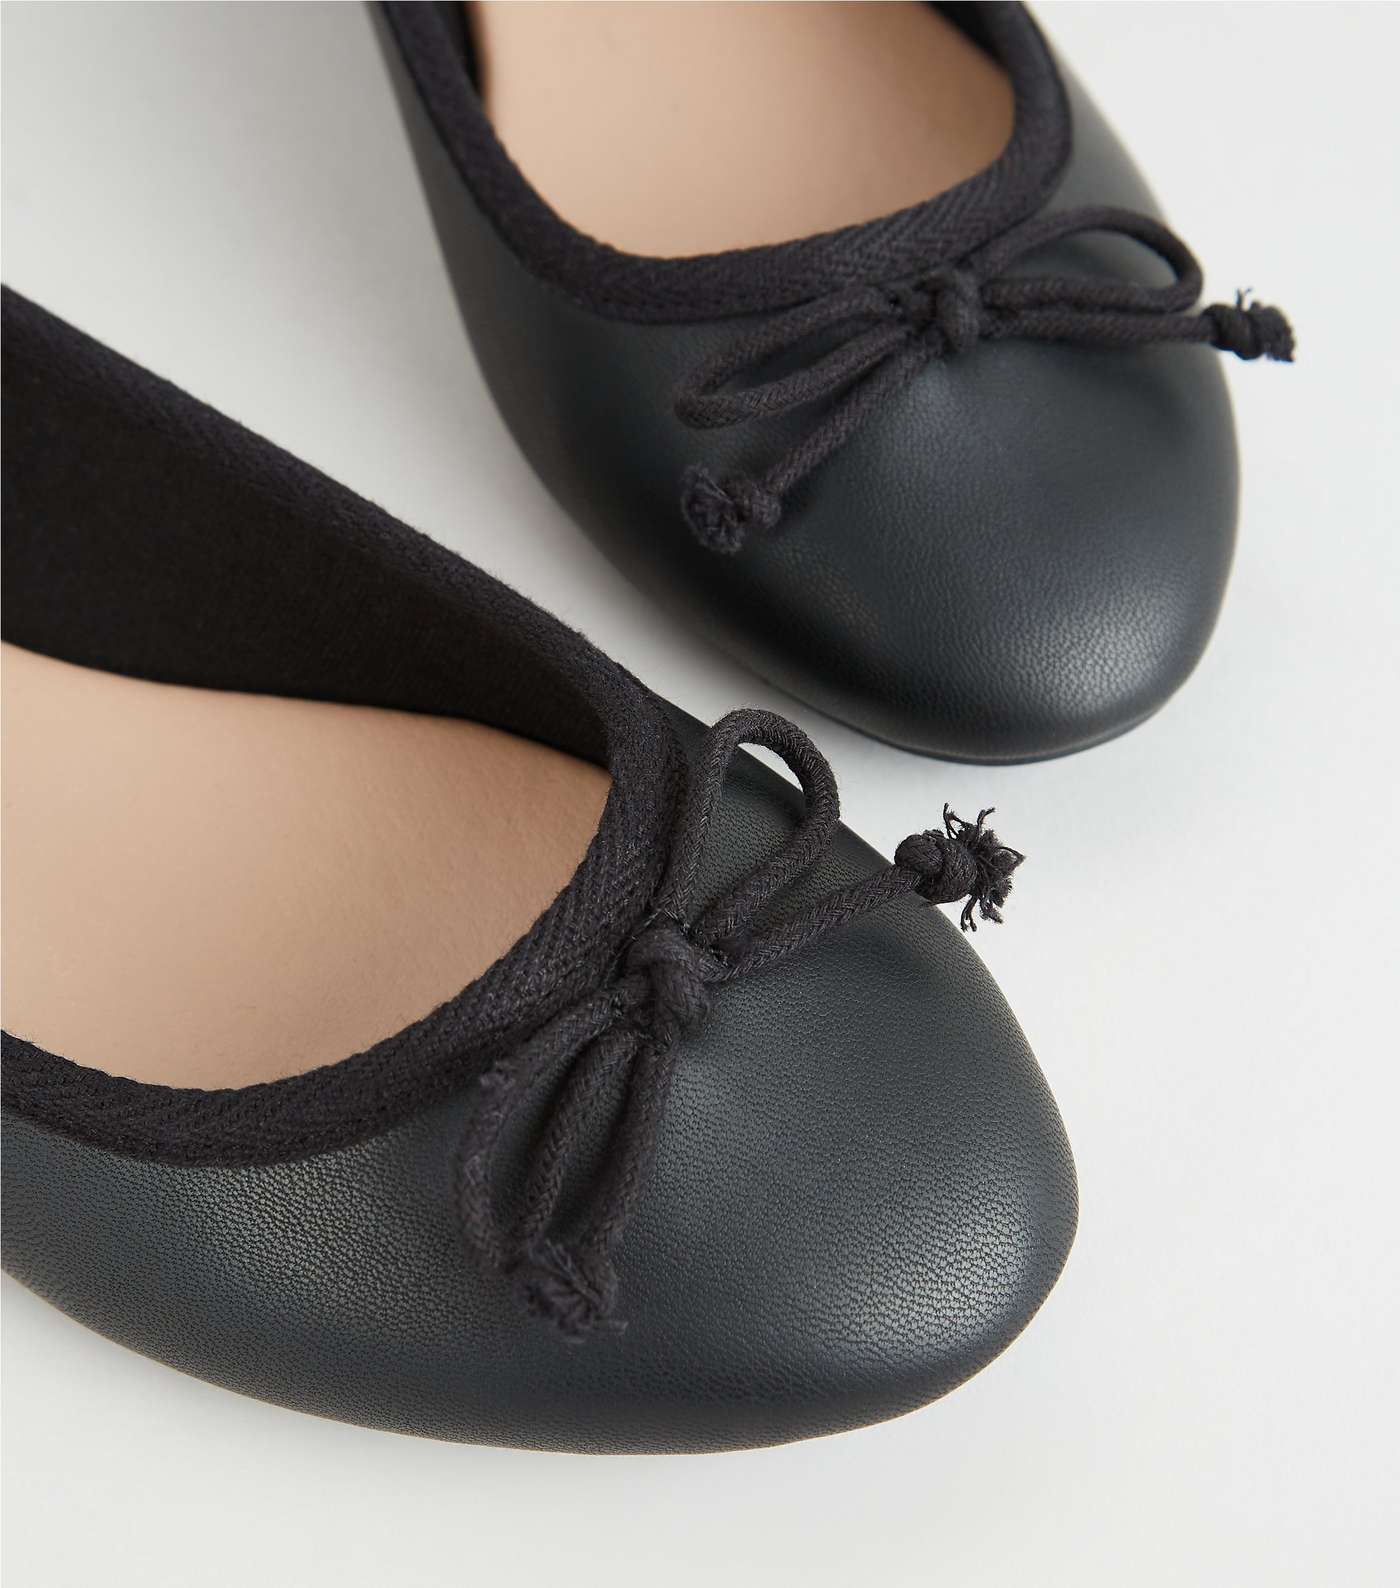 Black Leather-Look Bow Front Ballet Pumps Image 4